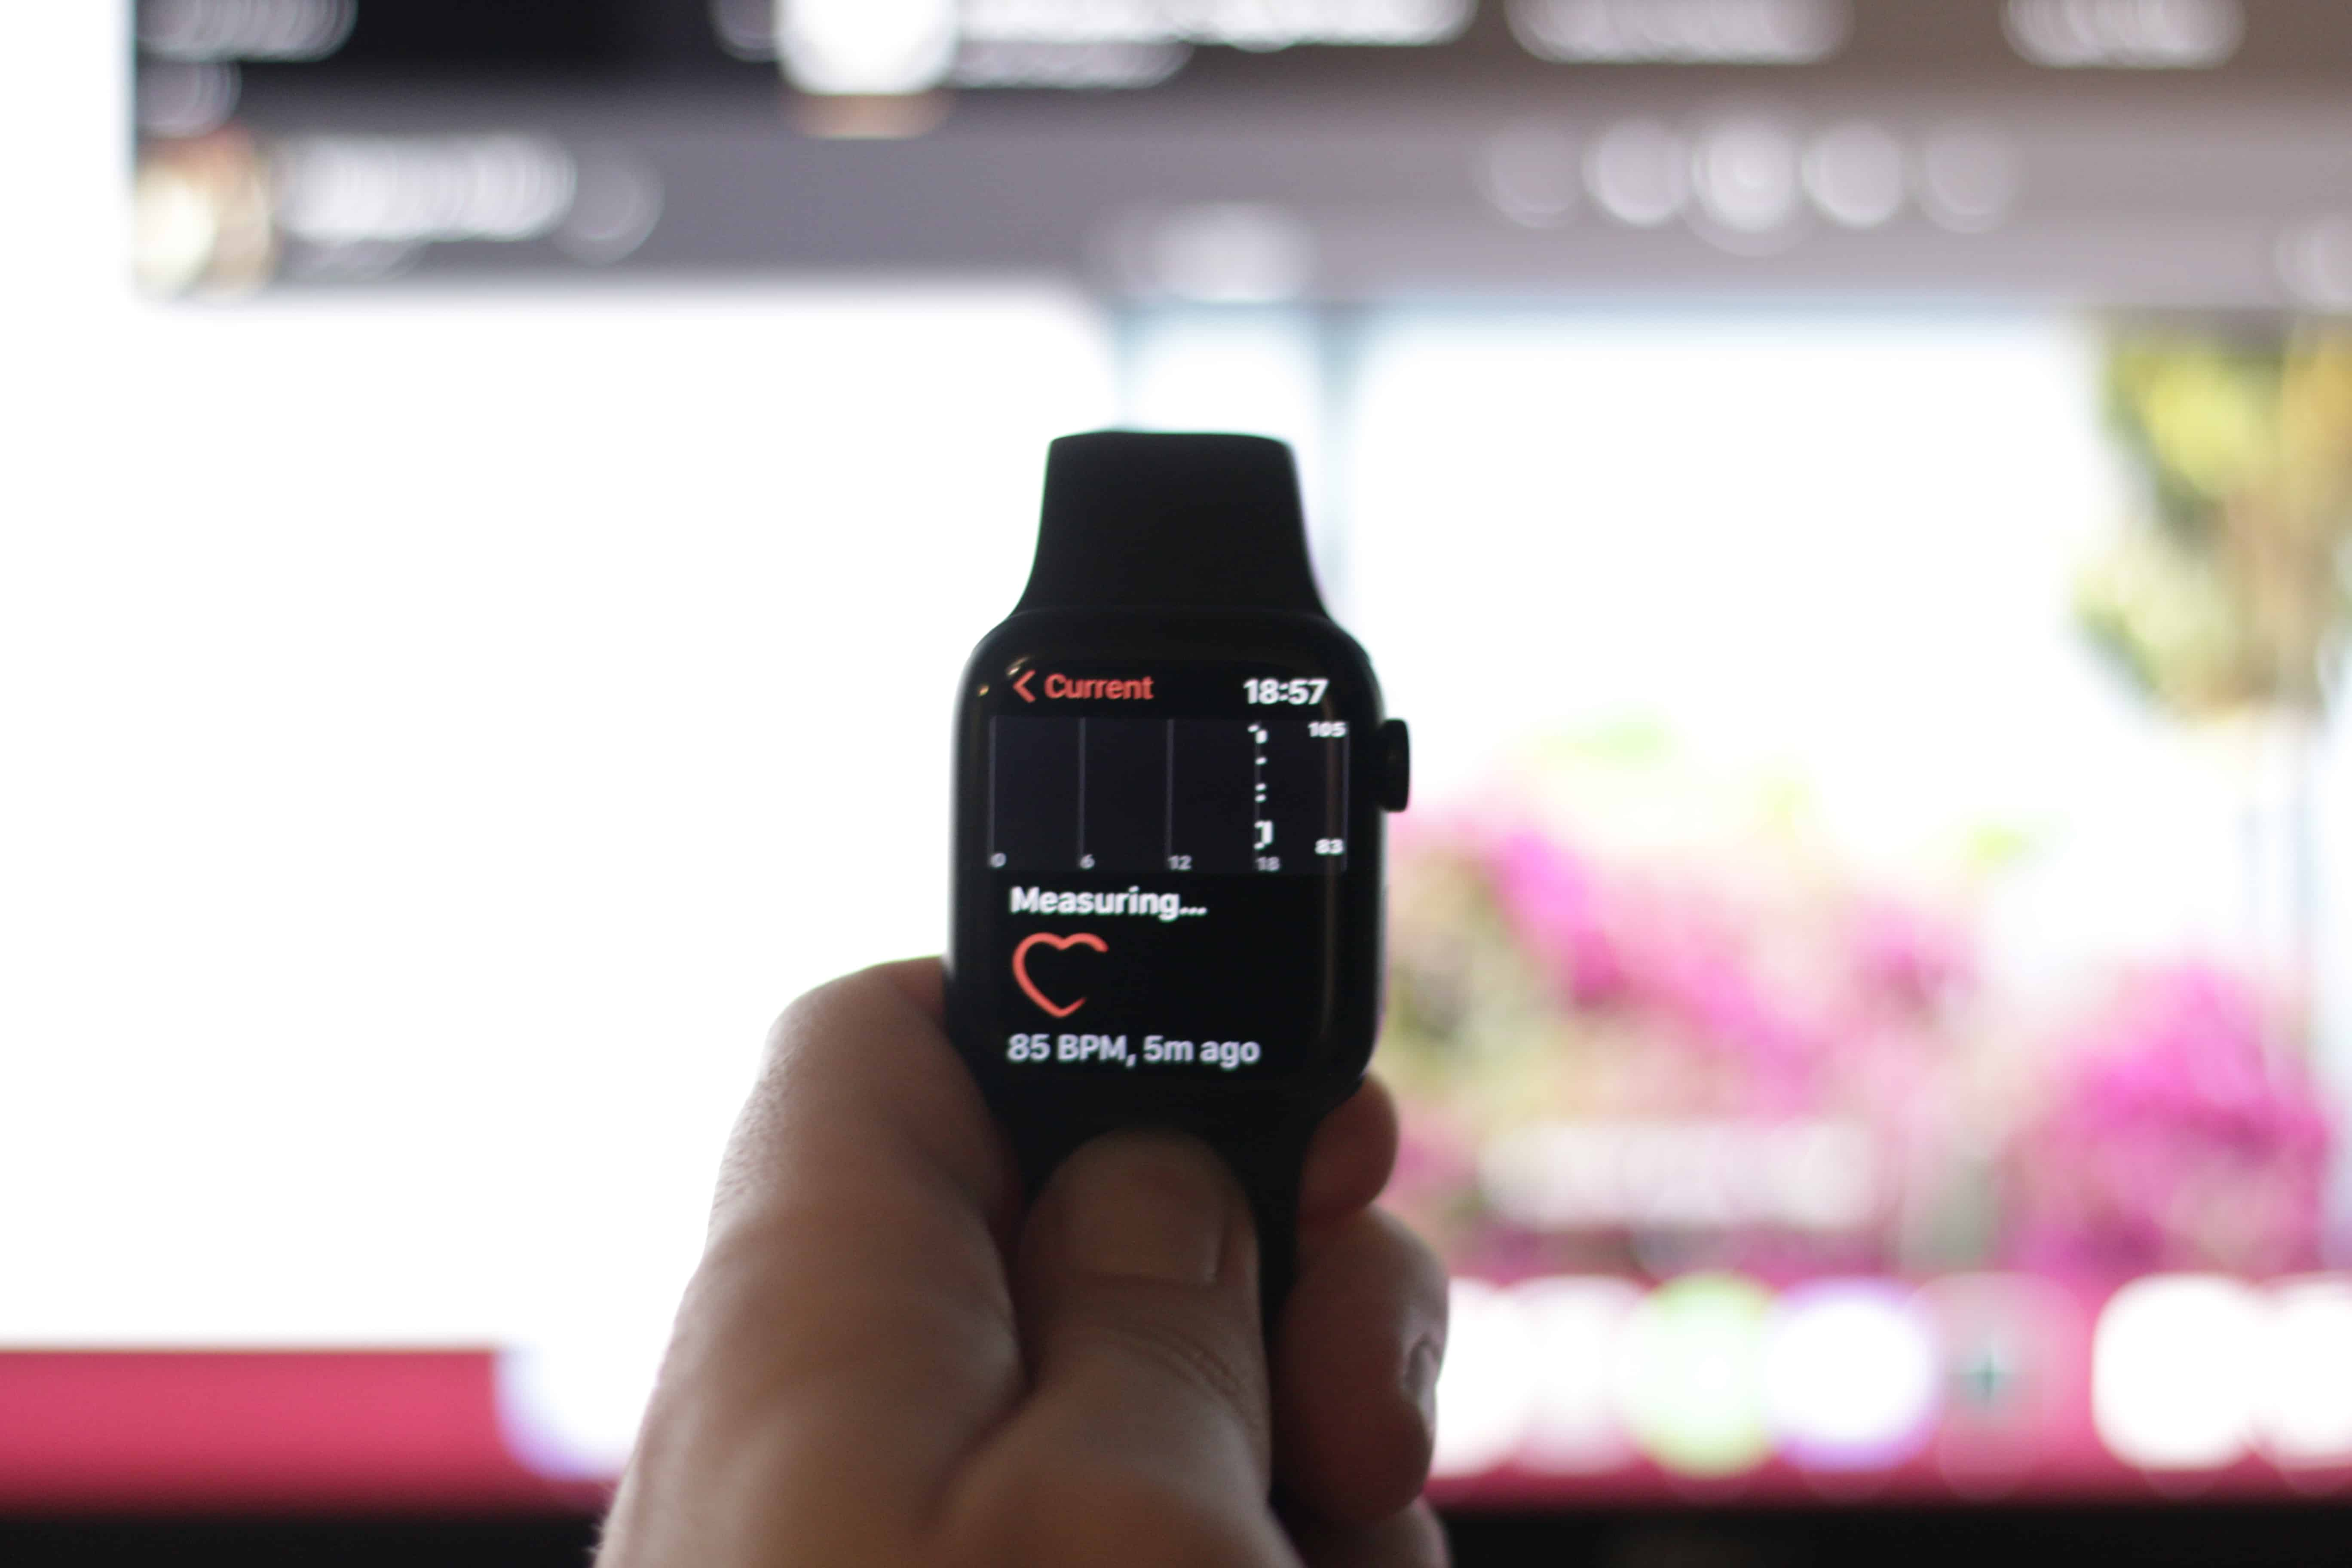 apple watch heart rate monitor explained